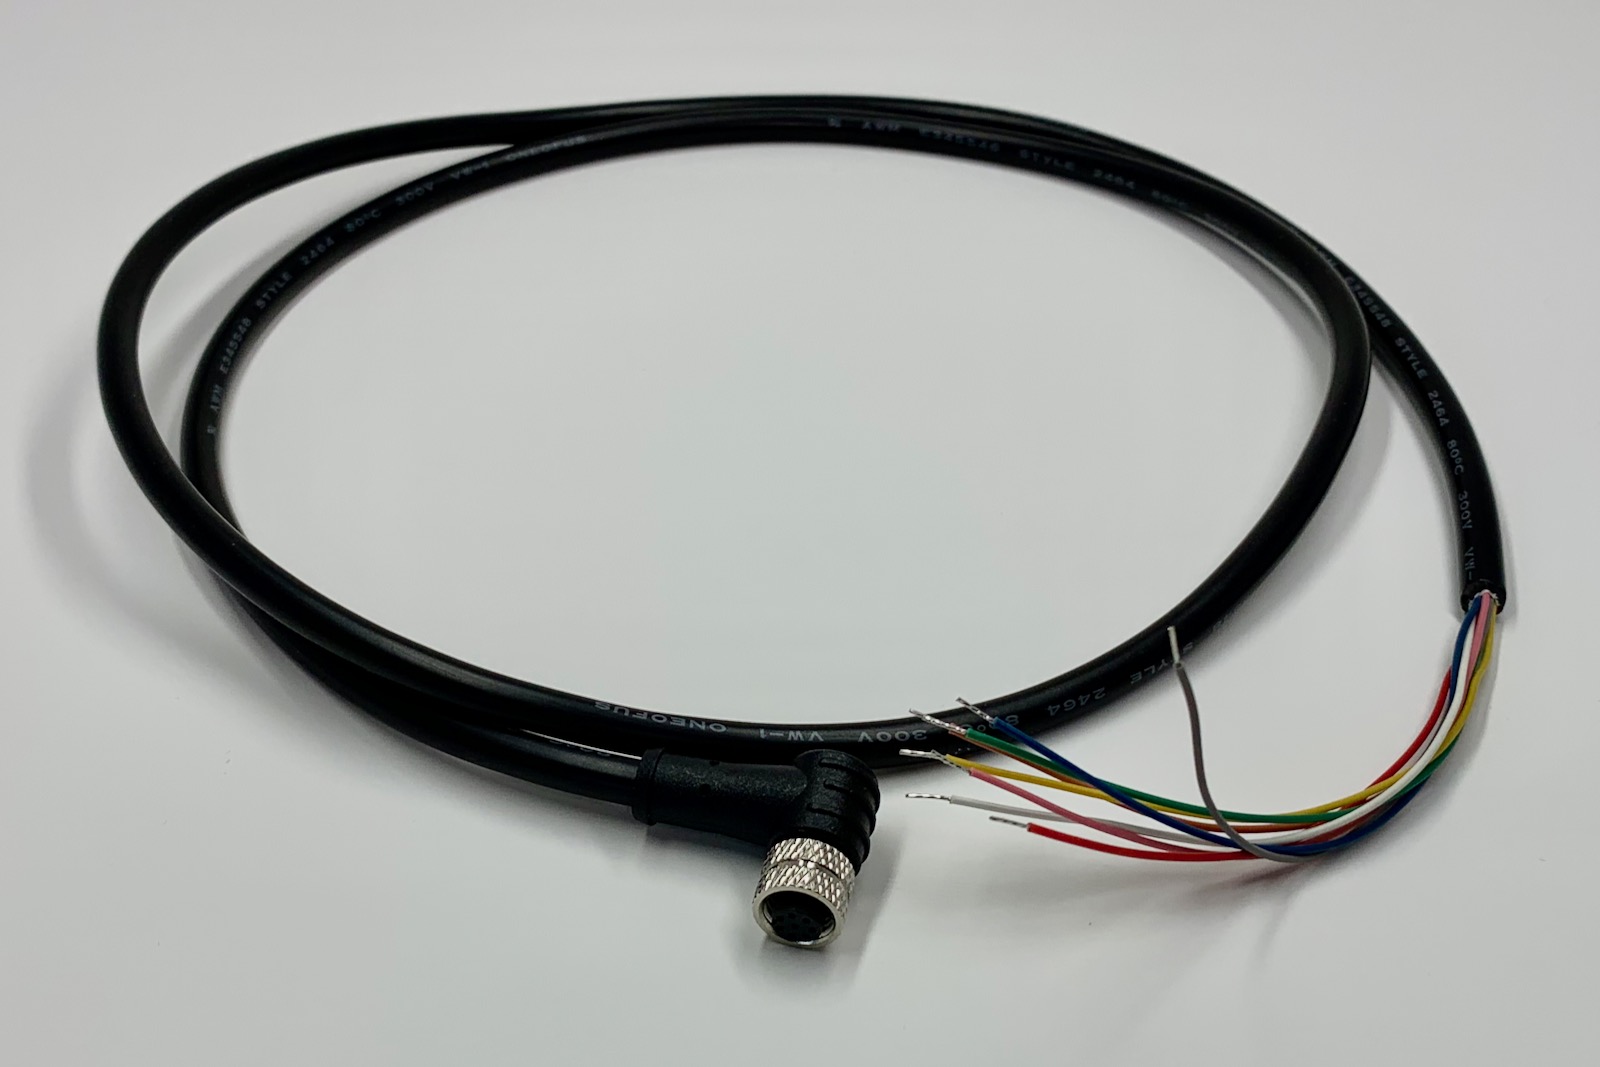 M8 cable